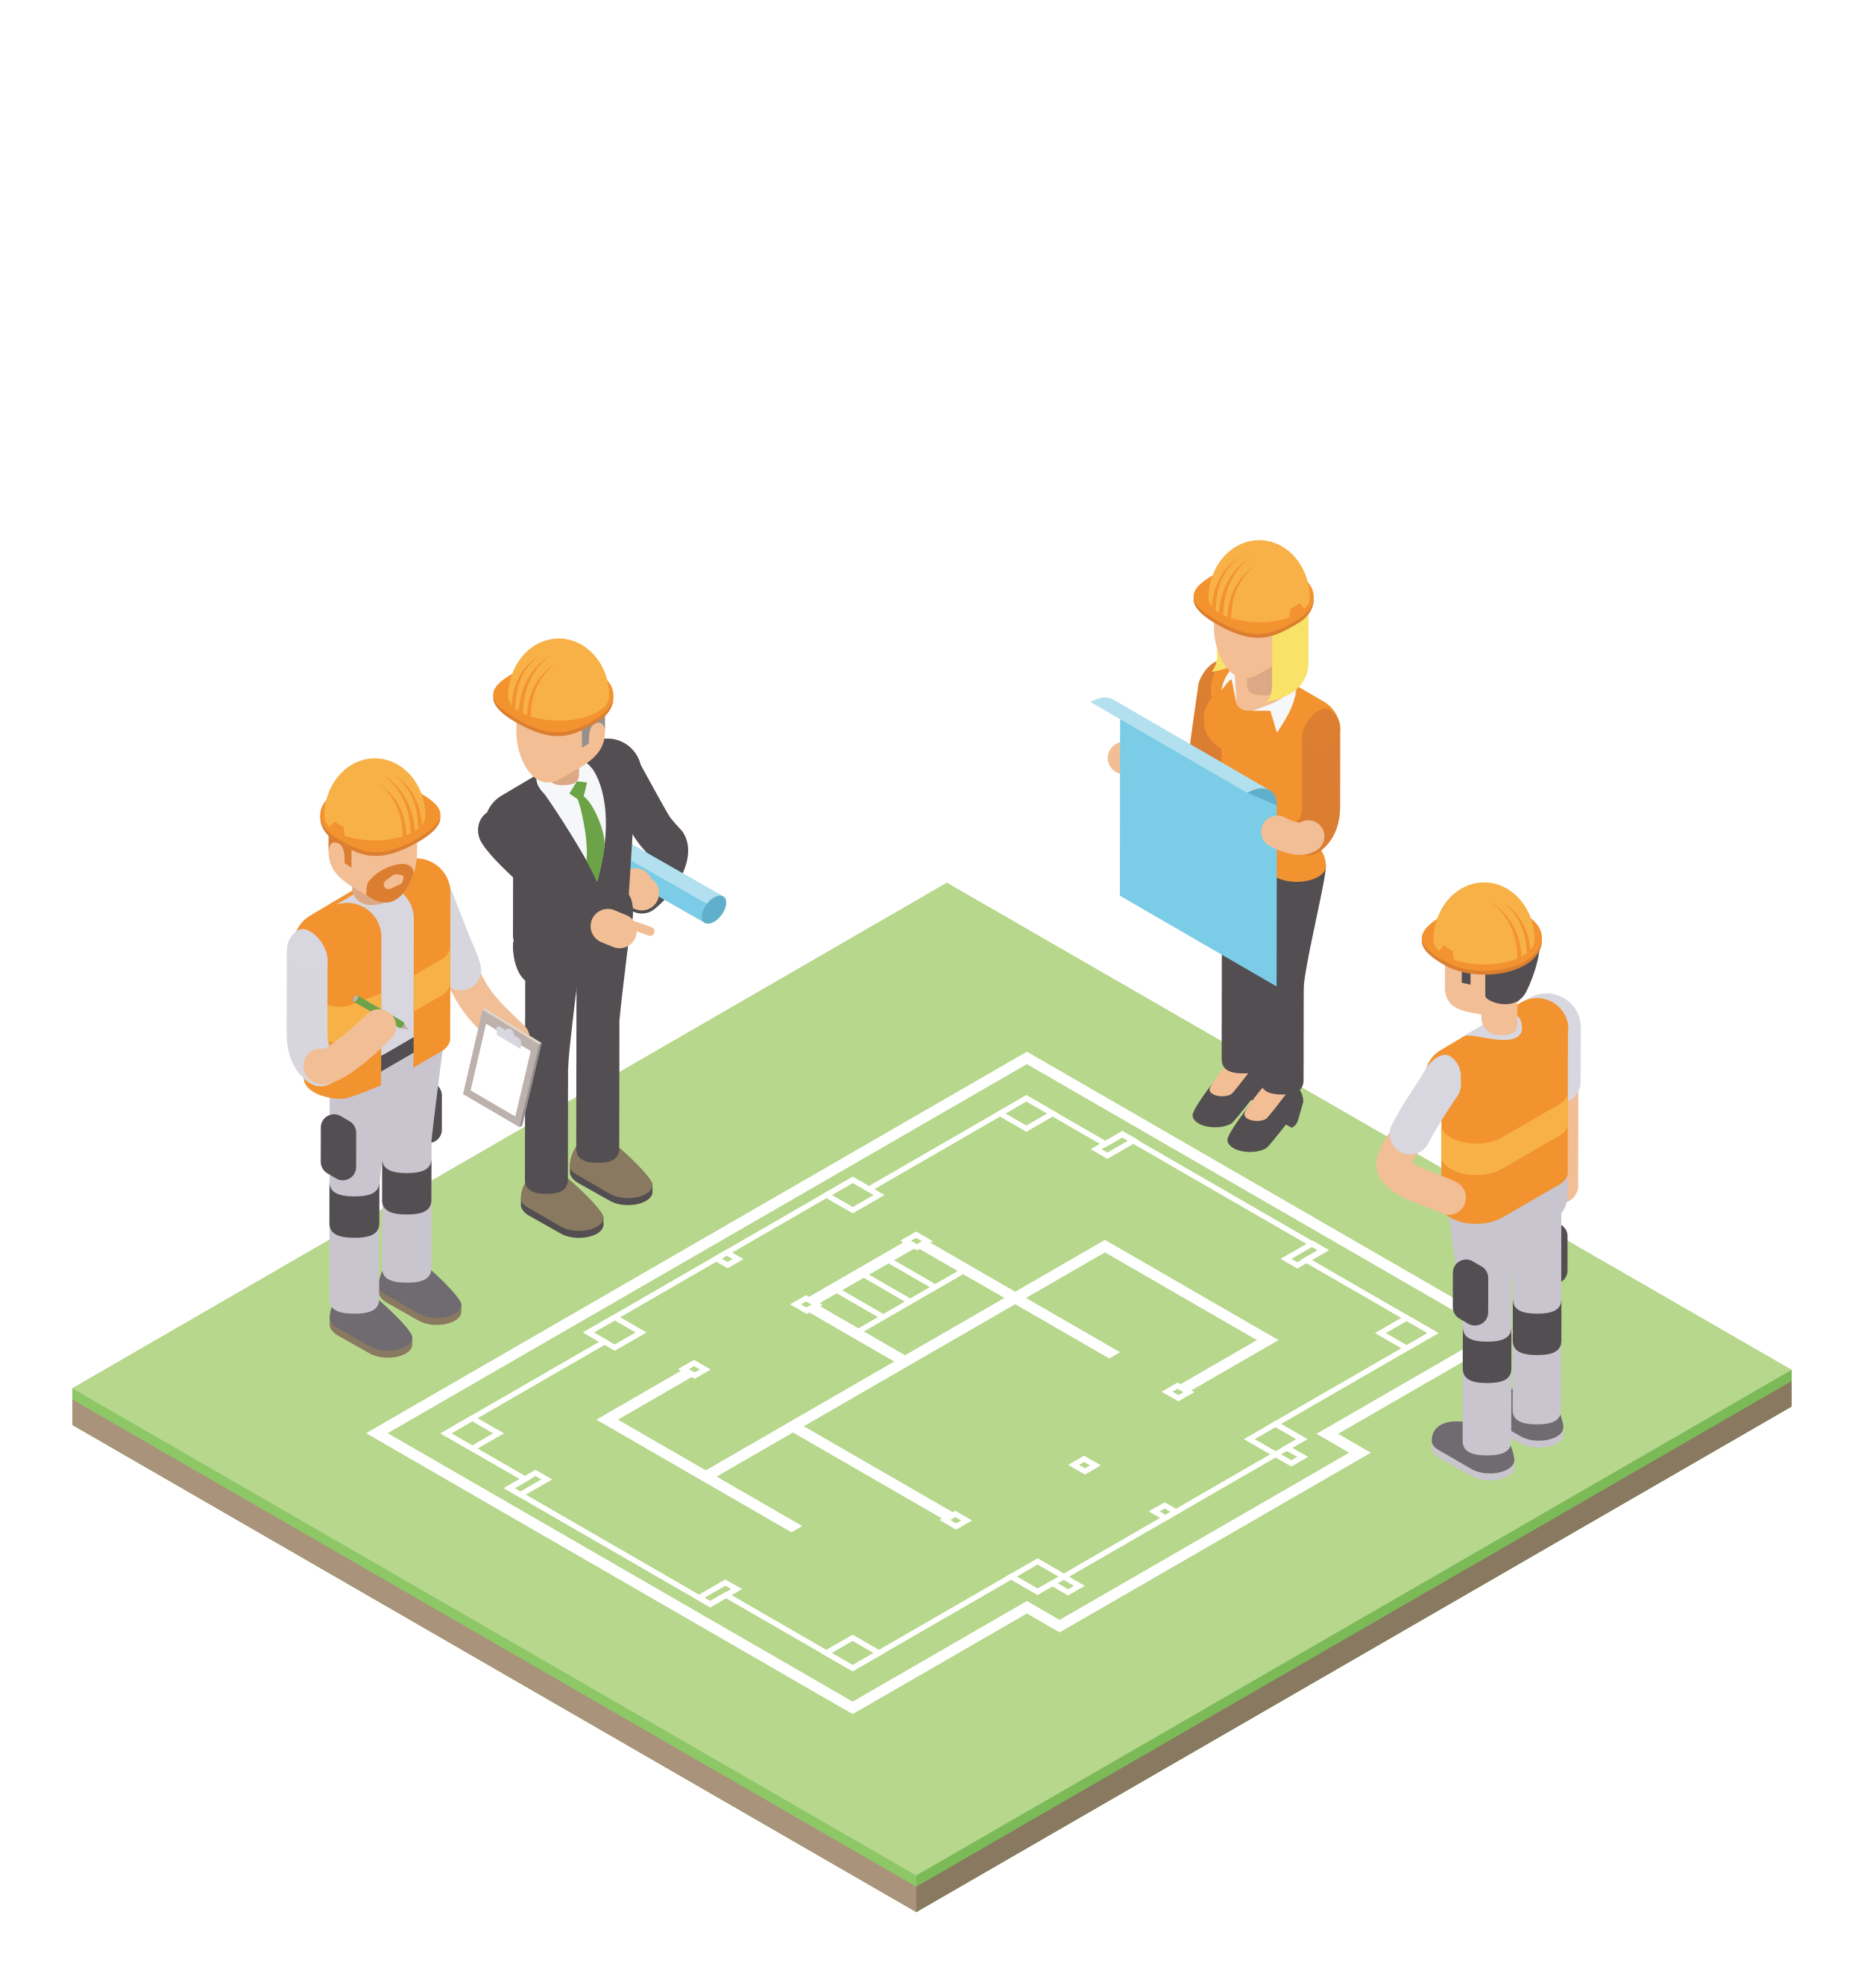 illustration_andre_levy_zhion_vector_isometric_perspective_infographic_construction_building_team_process_1.png